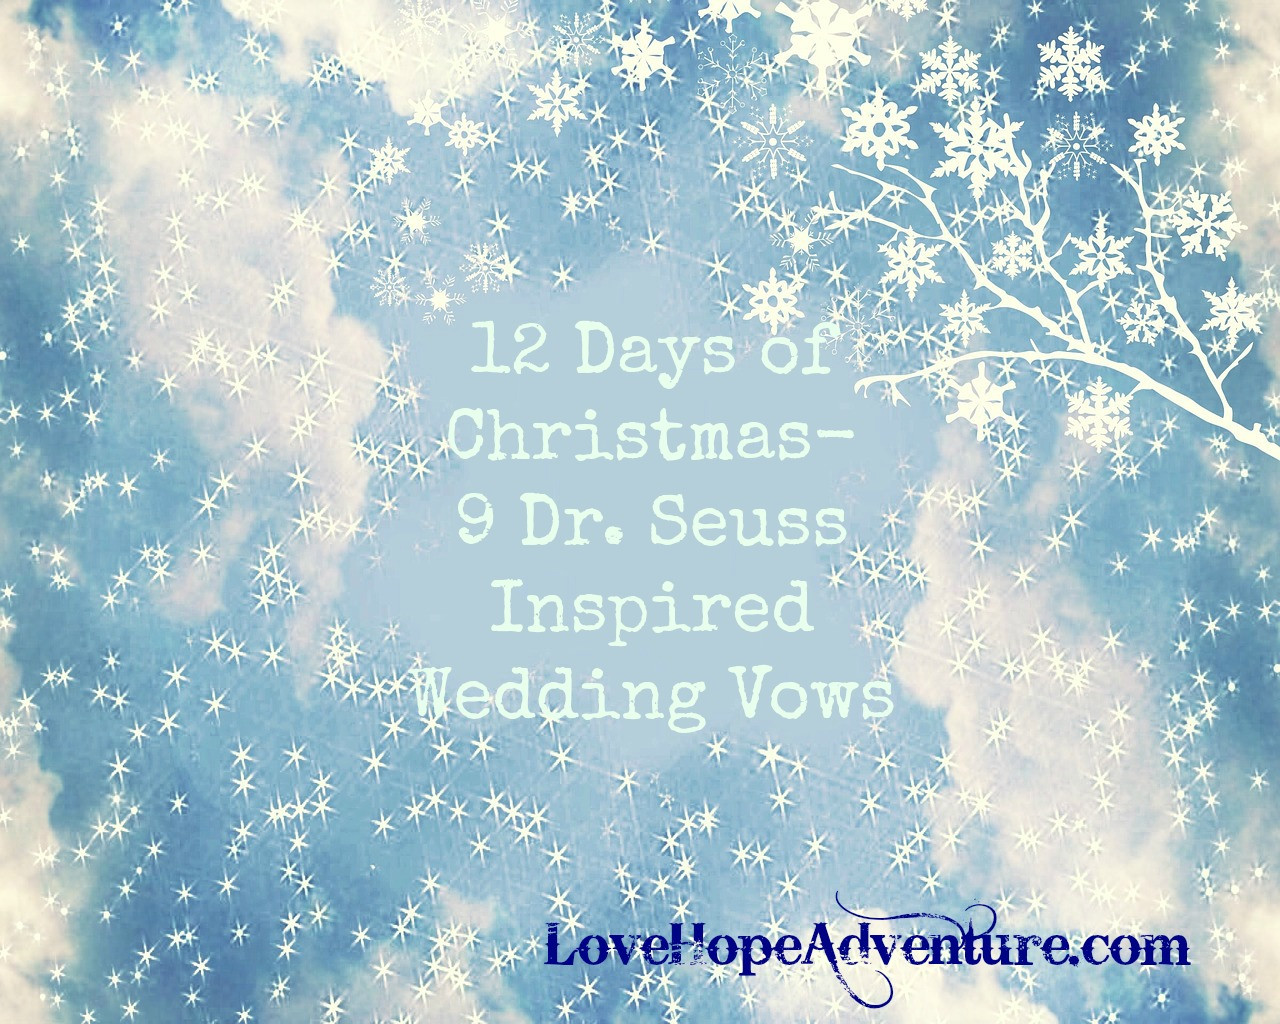 Dr Seuss Wedding Vows
 12 Days of Christmas 9 Dr Seuss Inspired Wedding Vows